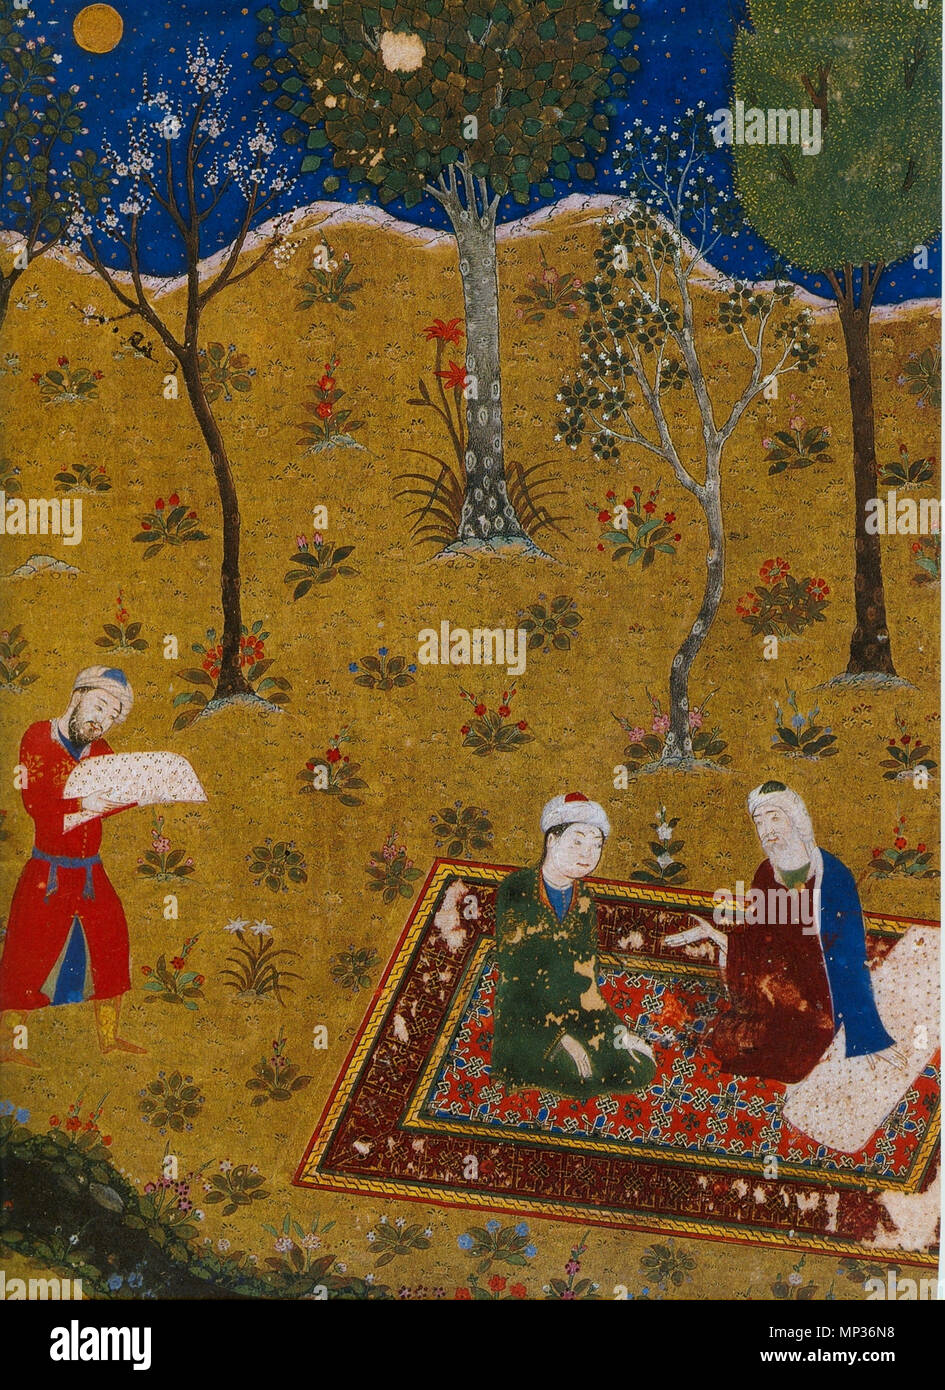 . English: The poet Sa'di converses by night with a young friend in a garden. Miniature from Gulistan Sa'di. Herat, 1427. Chester Beatty Library, Dublin. f.3r . 1427. Anonymous 1179 The poet Sa'di converses by night with a young friend in a garden. Miniature from Gulistan Sa'di. Herat, 1427. Chester Beatty Library, Dublin. f.3r Stock Photo